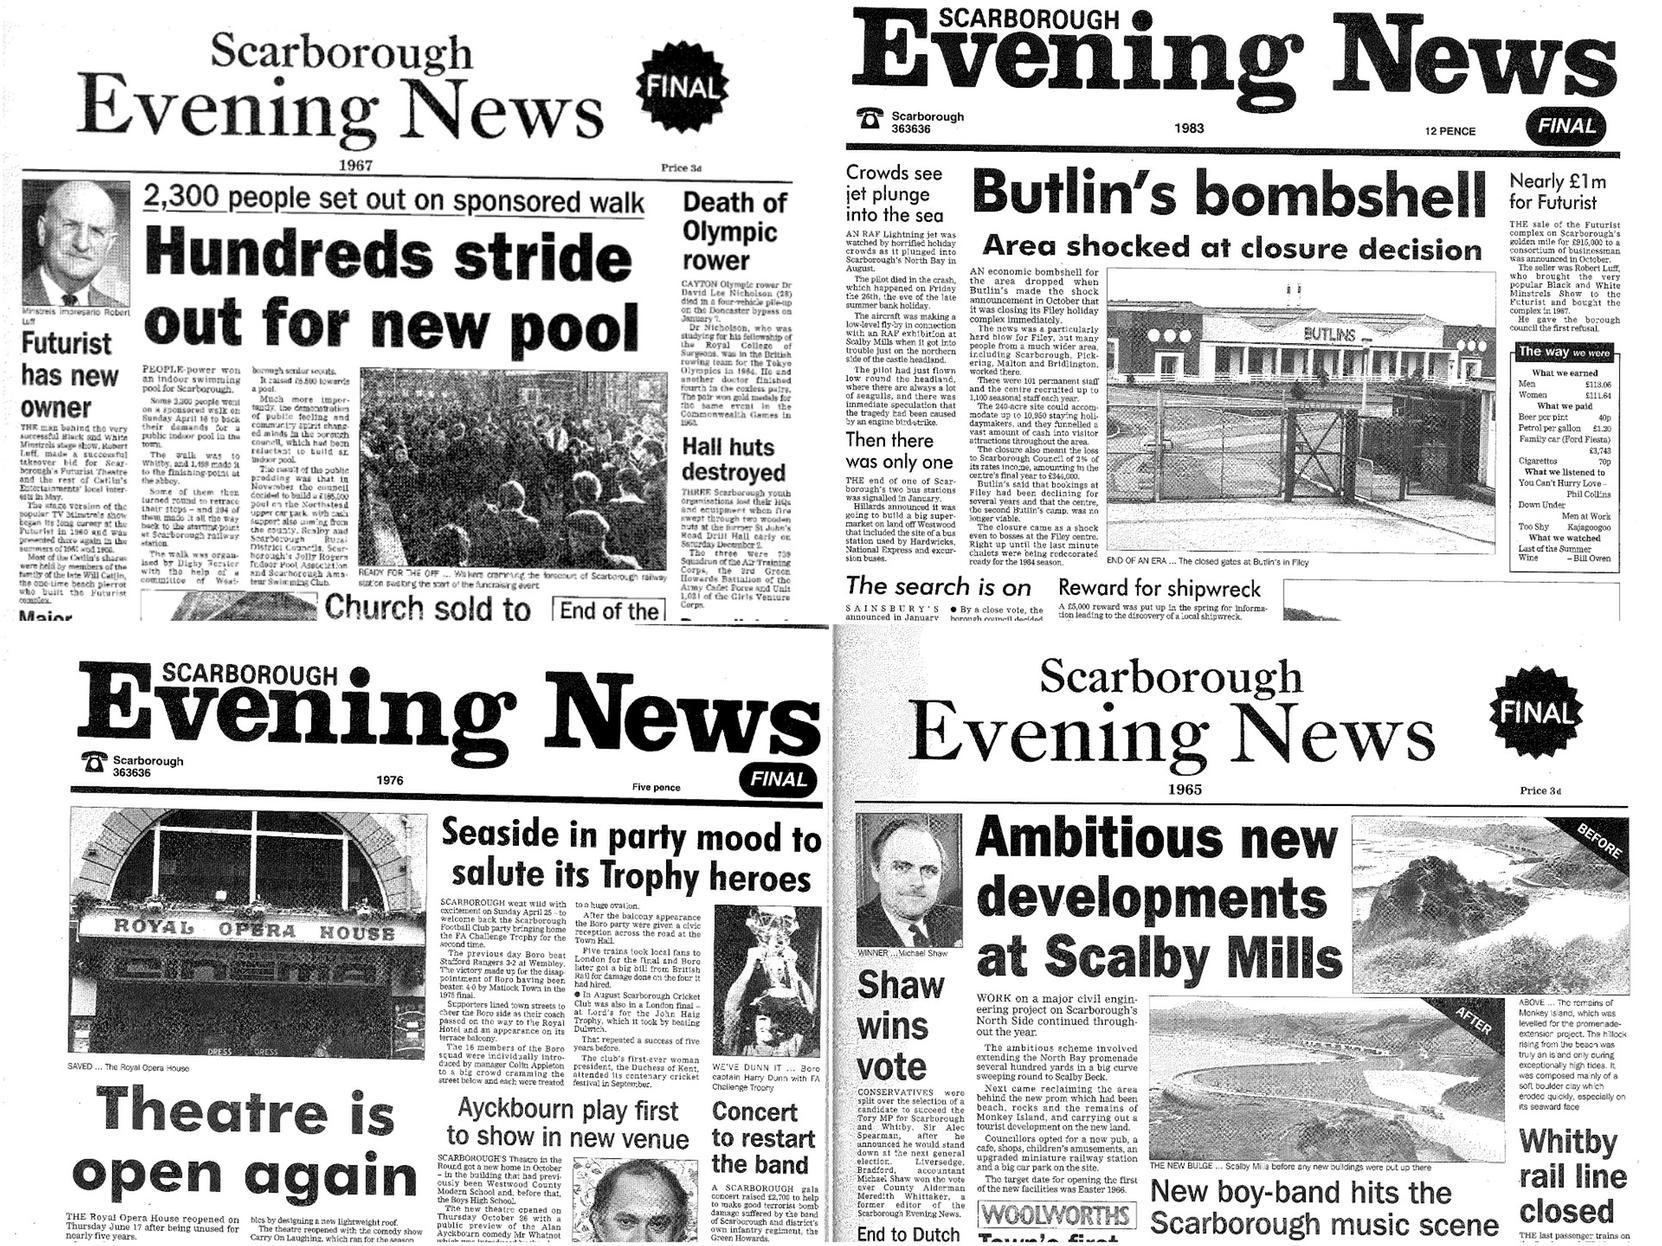 Headlines from across the years.